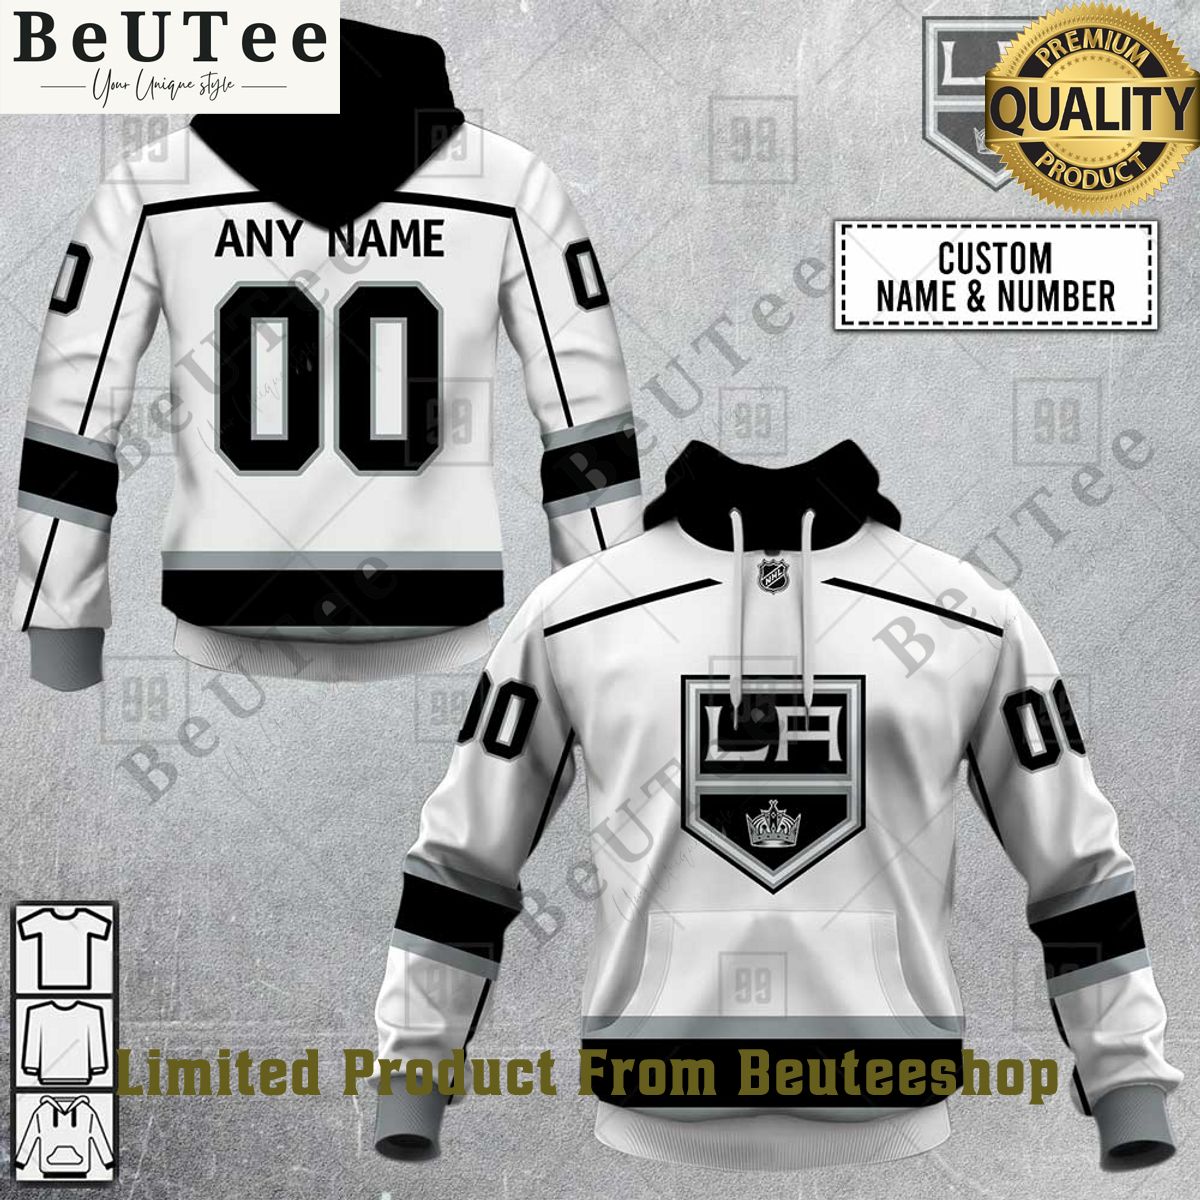 NHL Personalized Los Angeles Kings Jersey Hoodie shirt My friends!